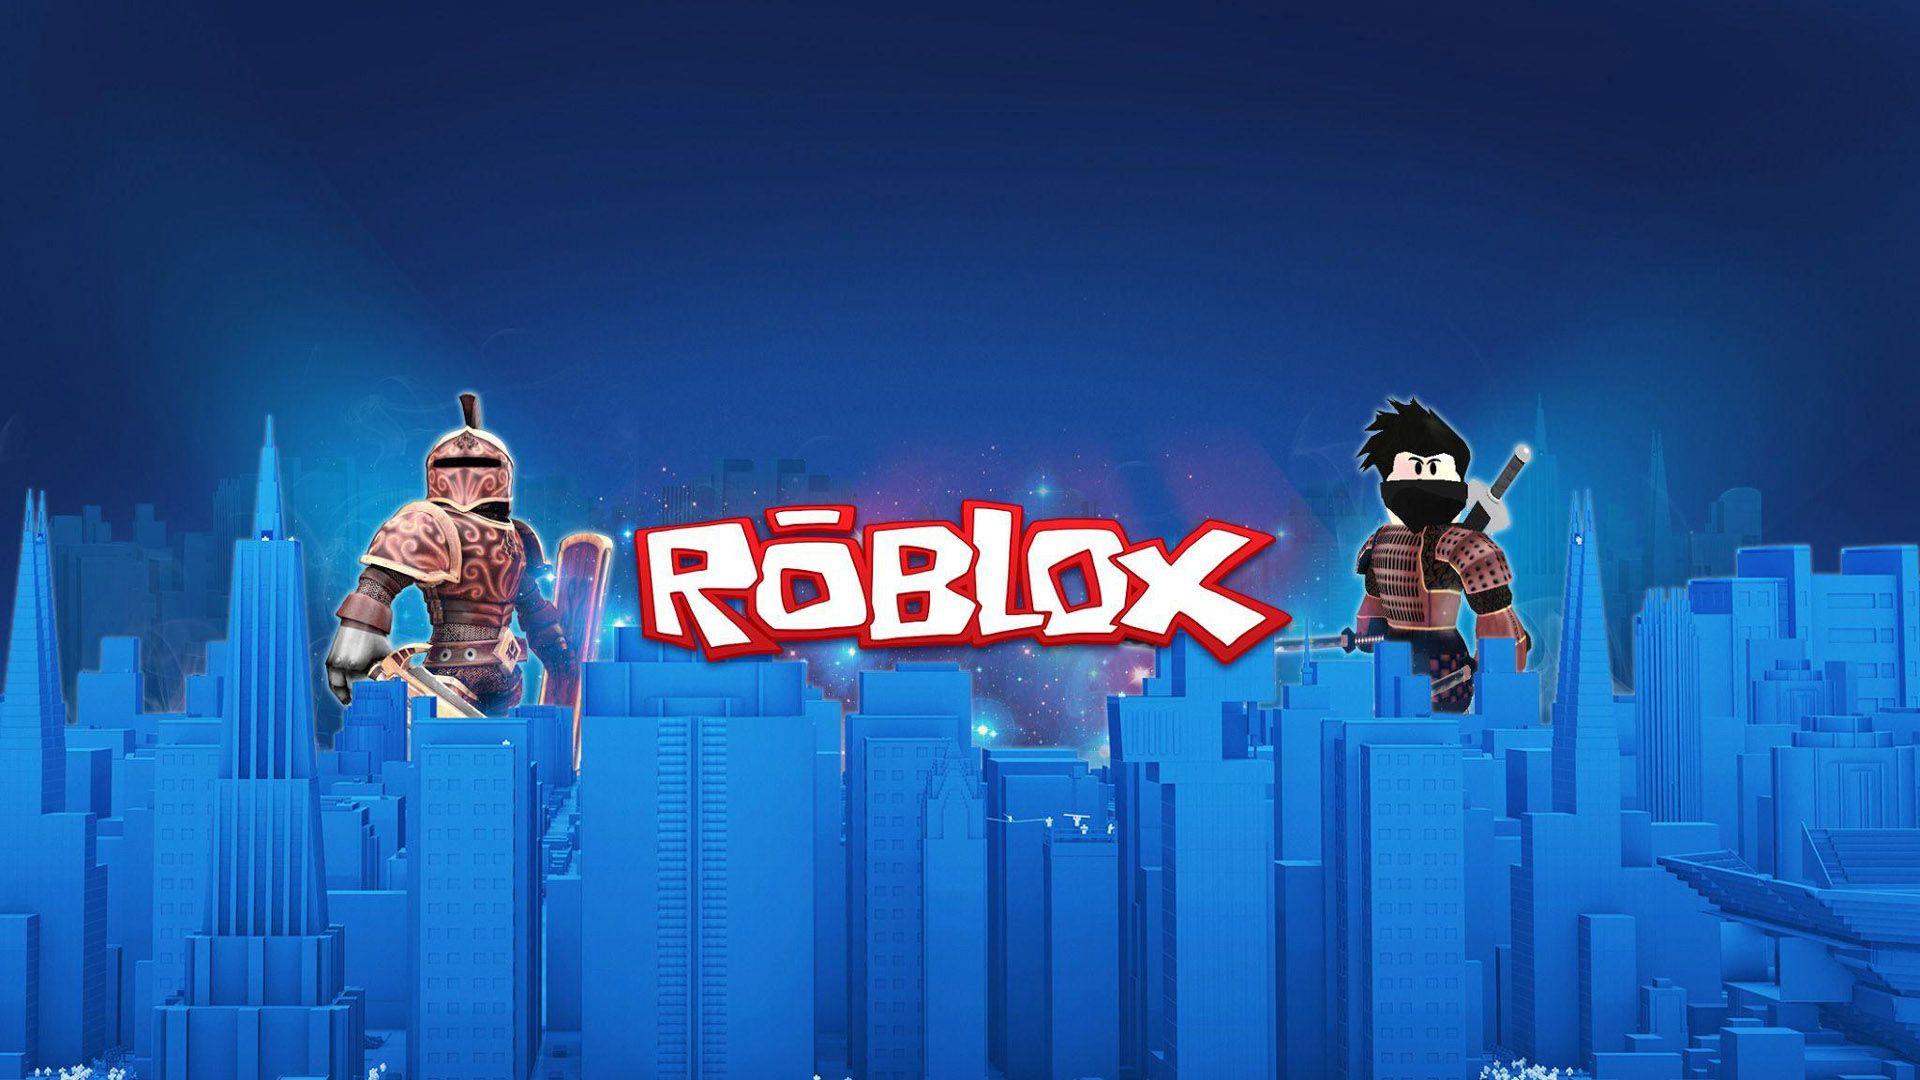 Roblox Characters Wallpapers Top Free Roblox Characters Backgrounds Wallpaperaccess - roblox dominus hd